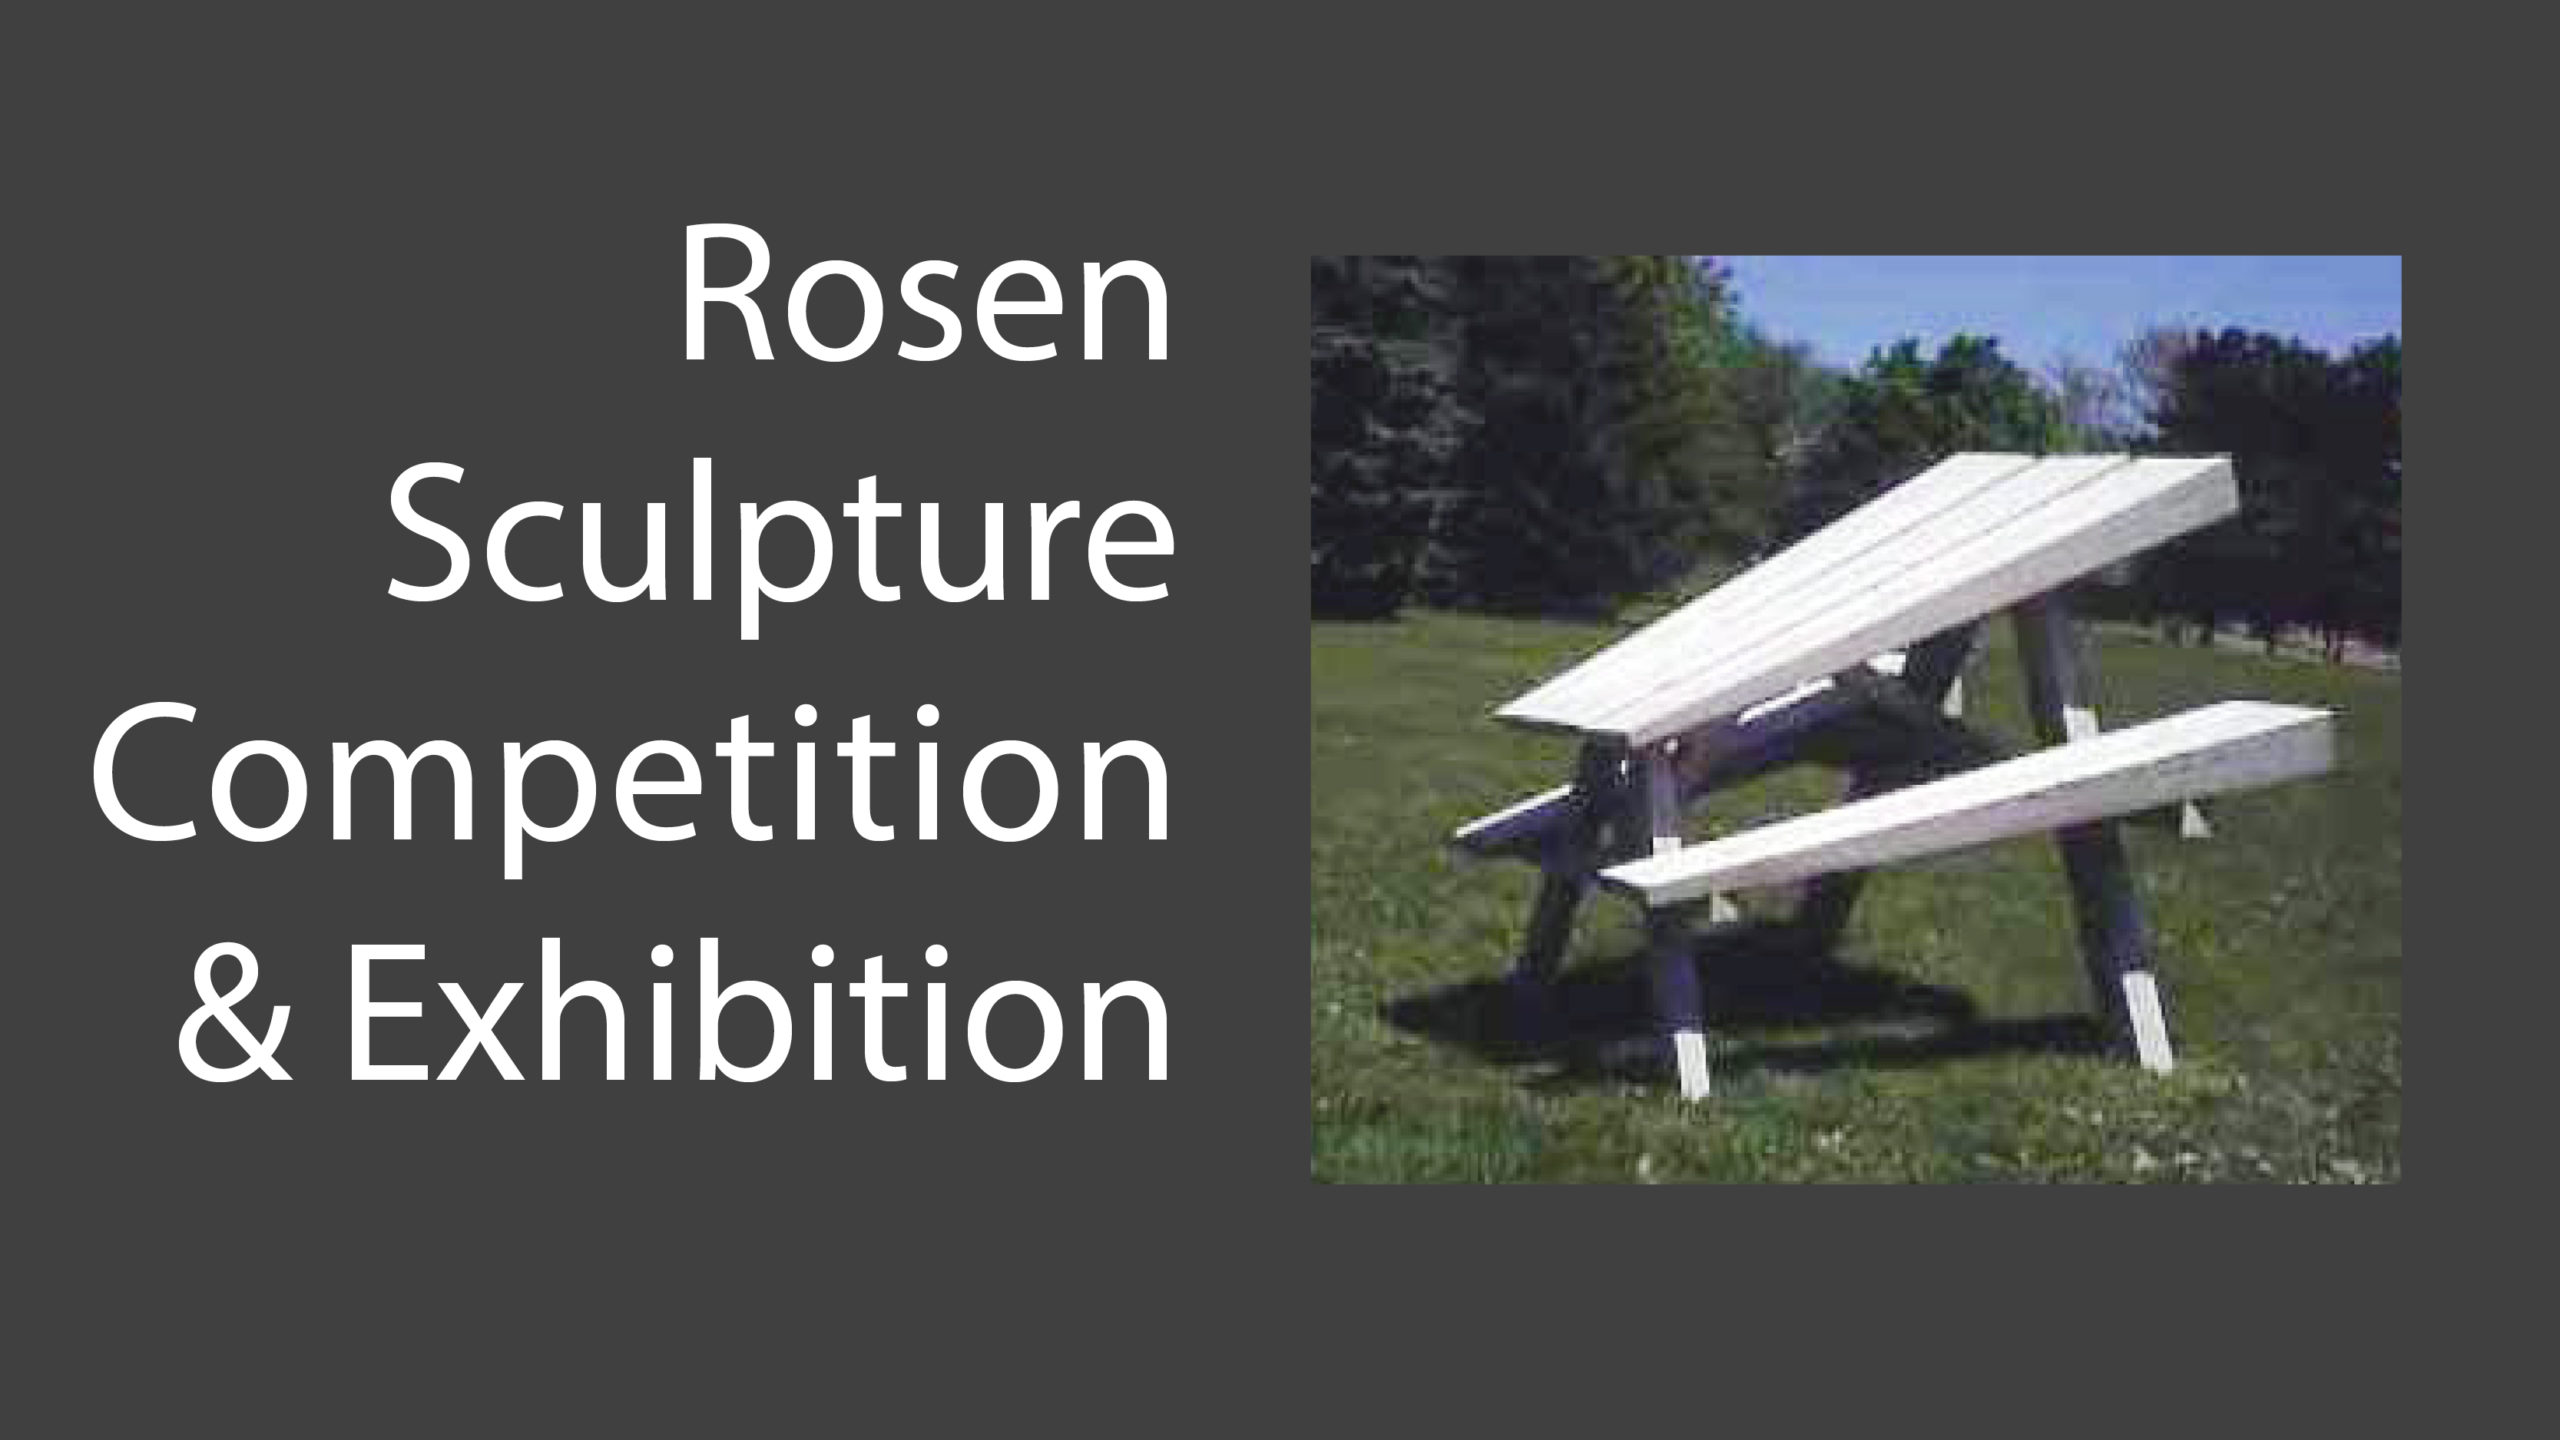 Charlie Brouwer, Picnic. 1991 / 5th Rosen Sculpture Competition Winner.